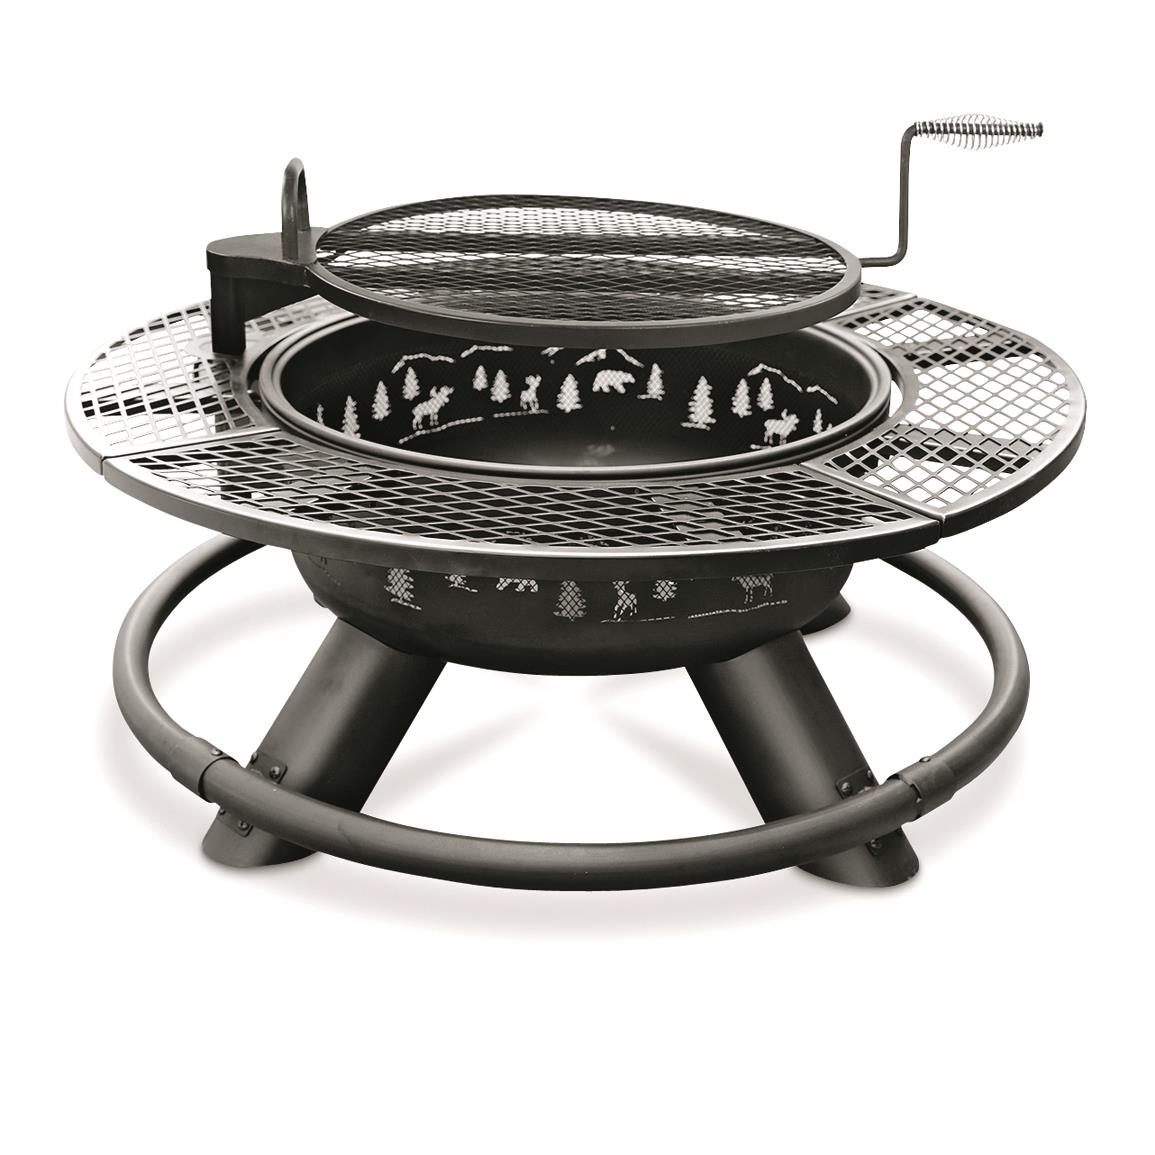 Castlecreek 47 Fire Pit With Bbq Grate, Ranch Fire Pit With Grilling Grate